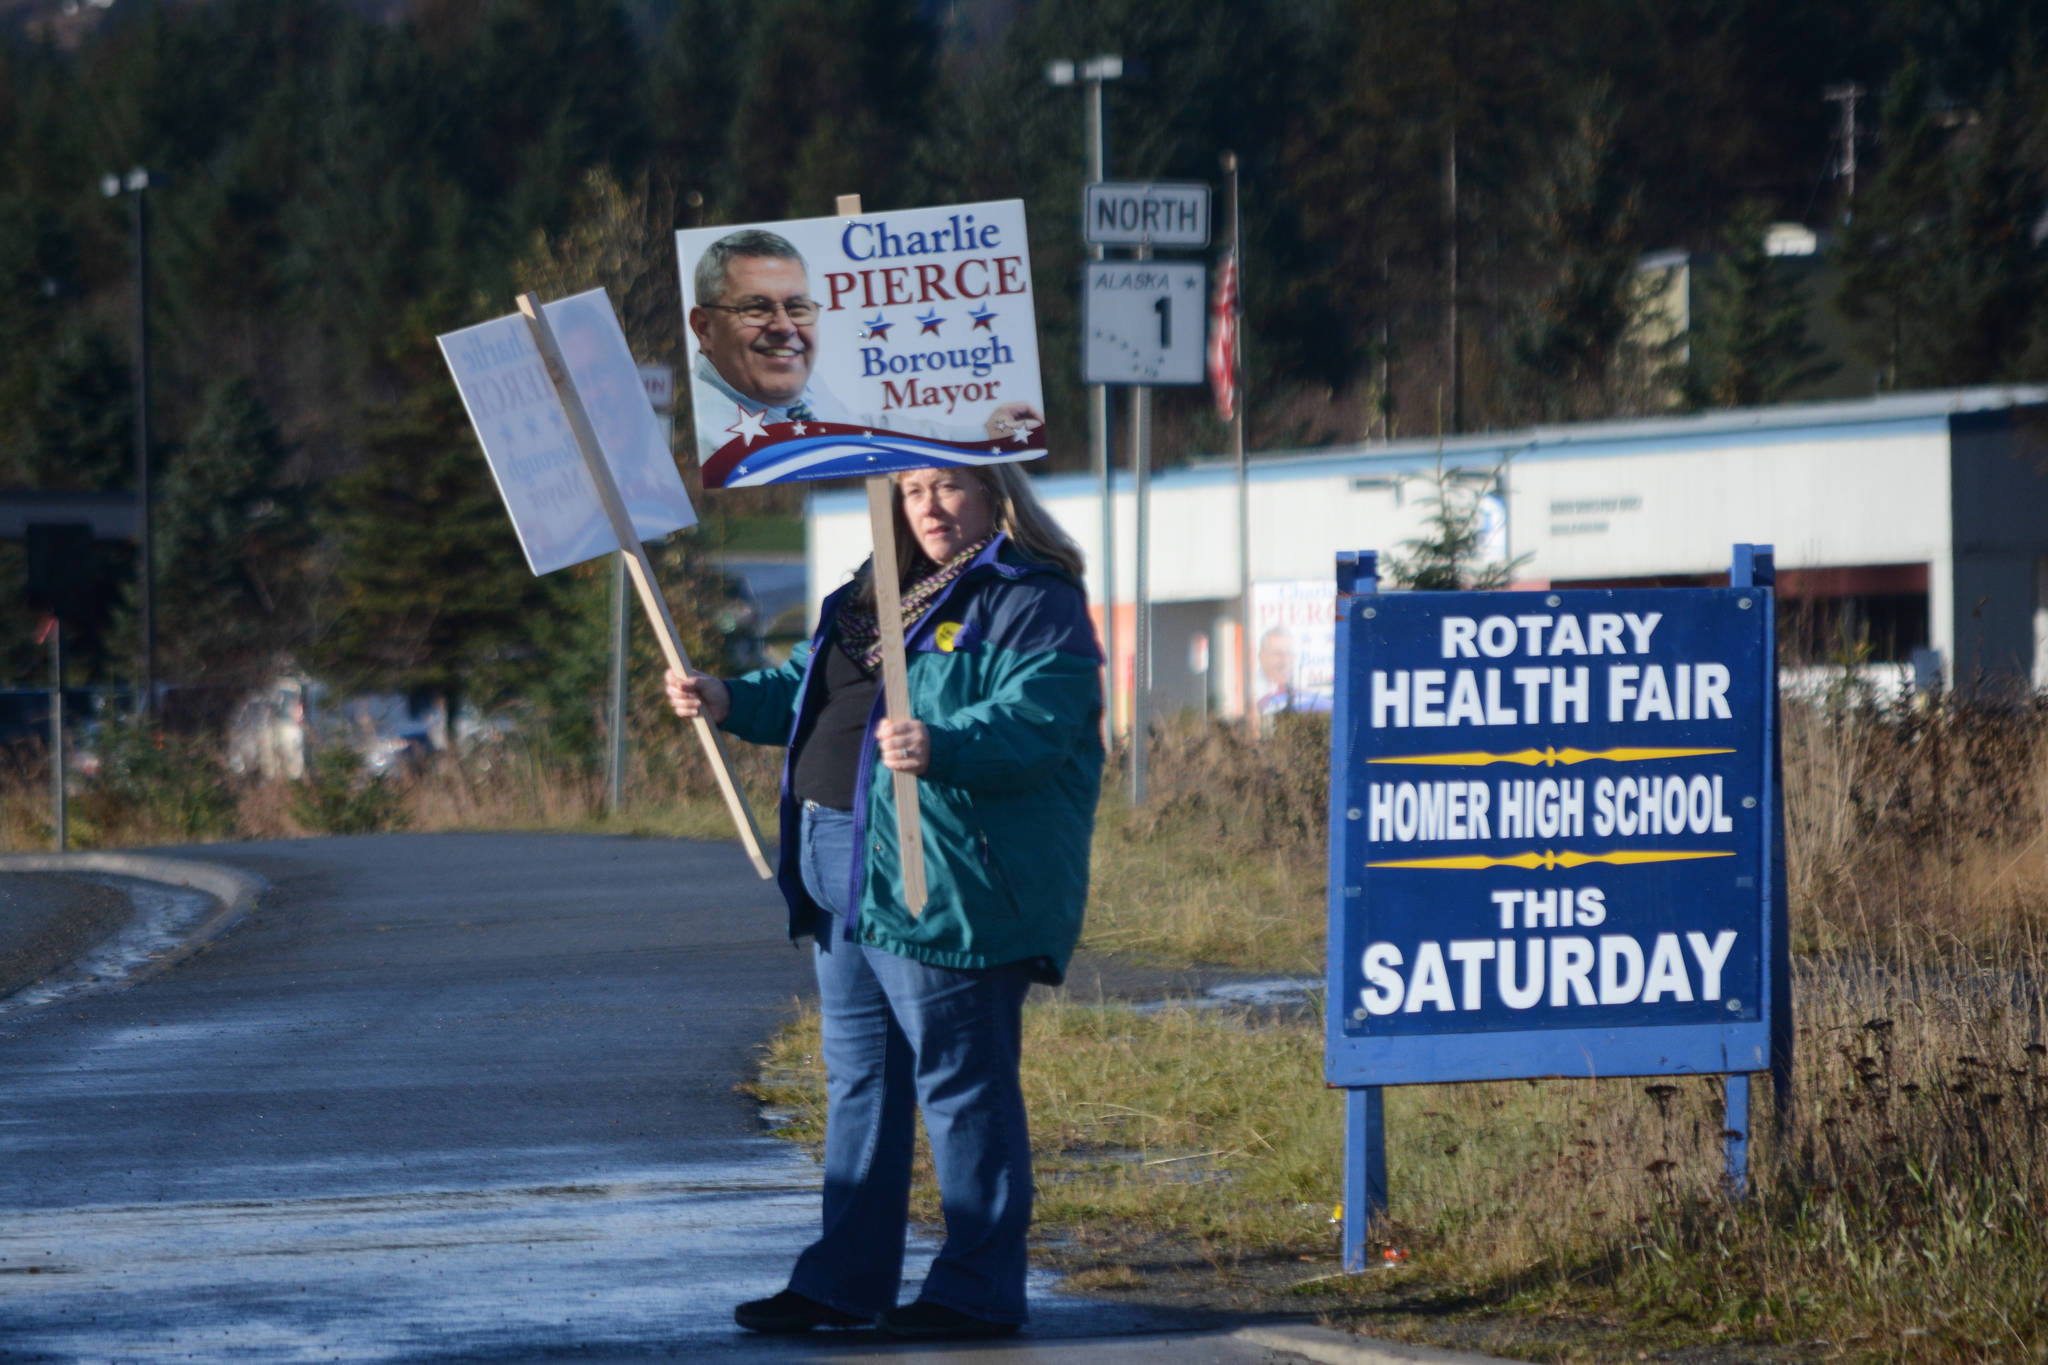 Lou Pontious waves signs for Charlie Pierce on Tuesday afternon, Oct. 24, 2017, in Homer, Alaska, on the Homer Bypass near Lake Street. (Photo by Michael Armstrong, Homer News)